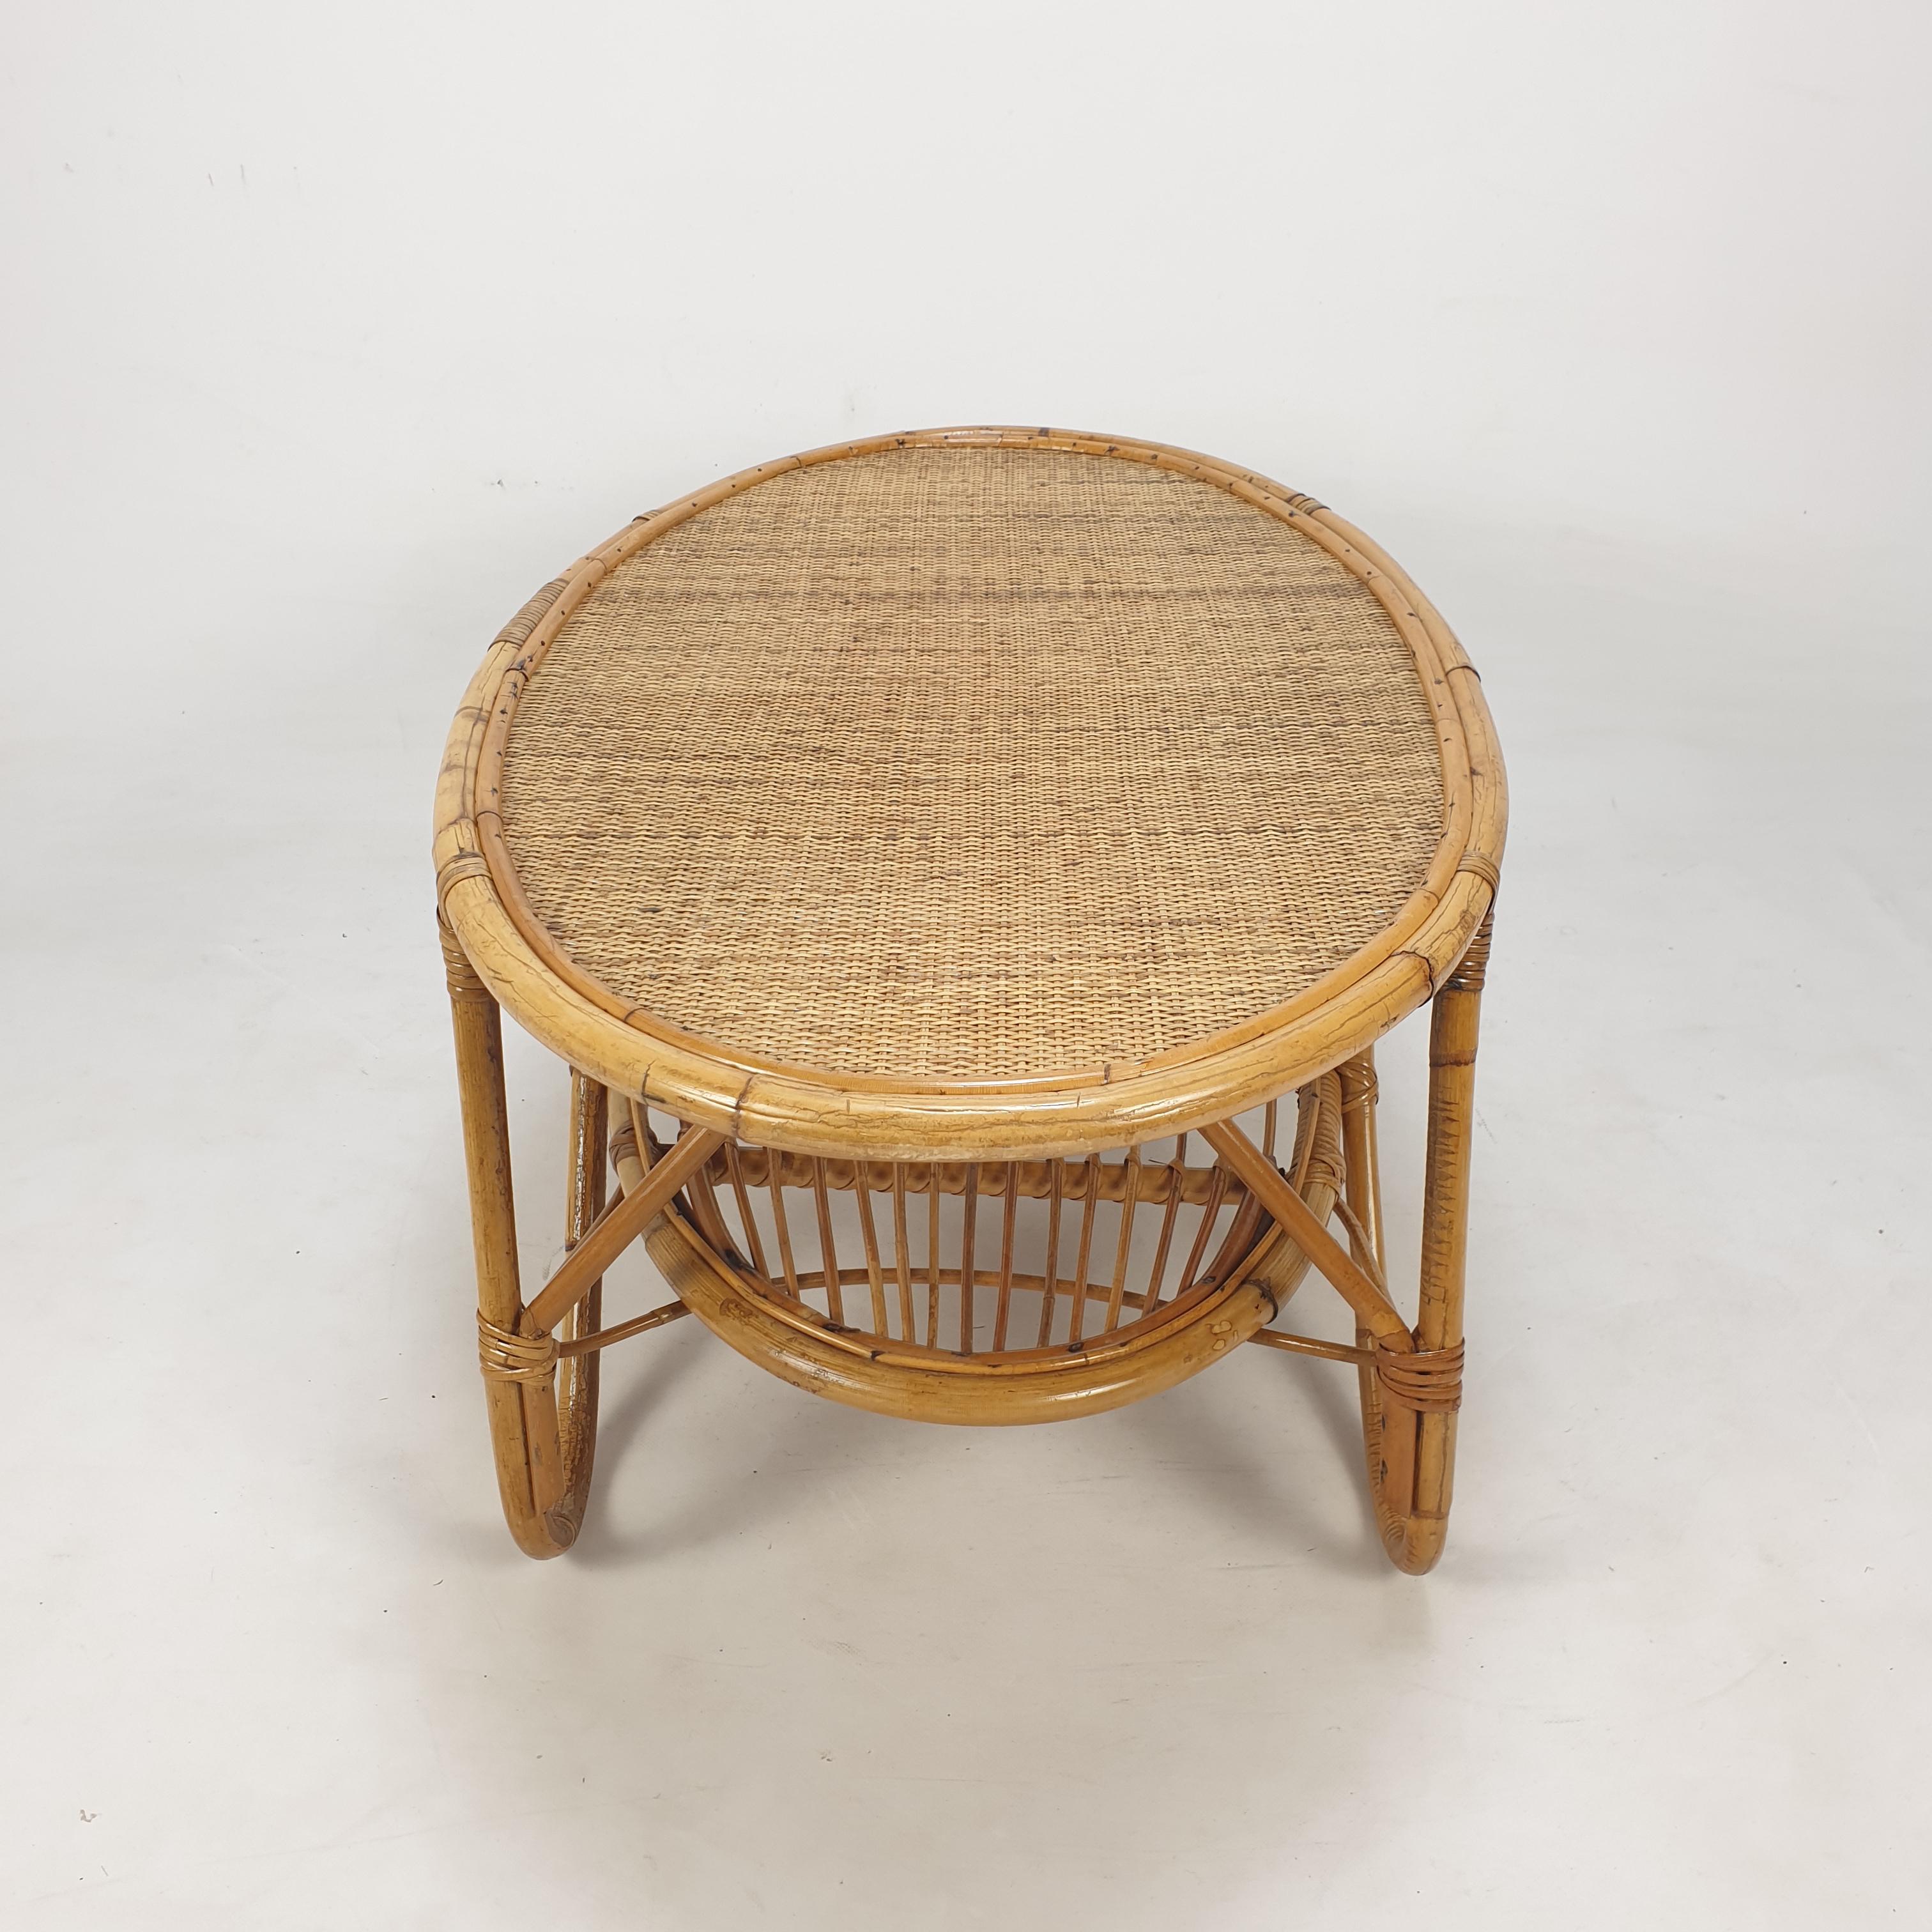 Italian Wicker and Rattan Coffee Table, 1960s For Sale 10